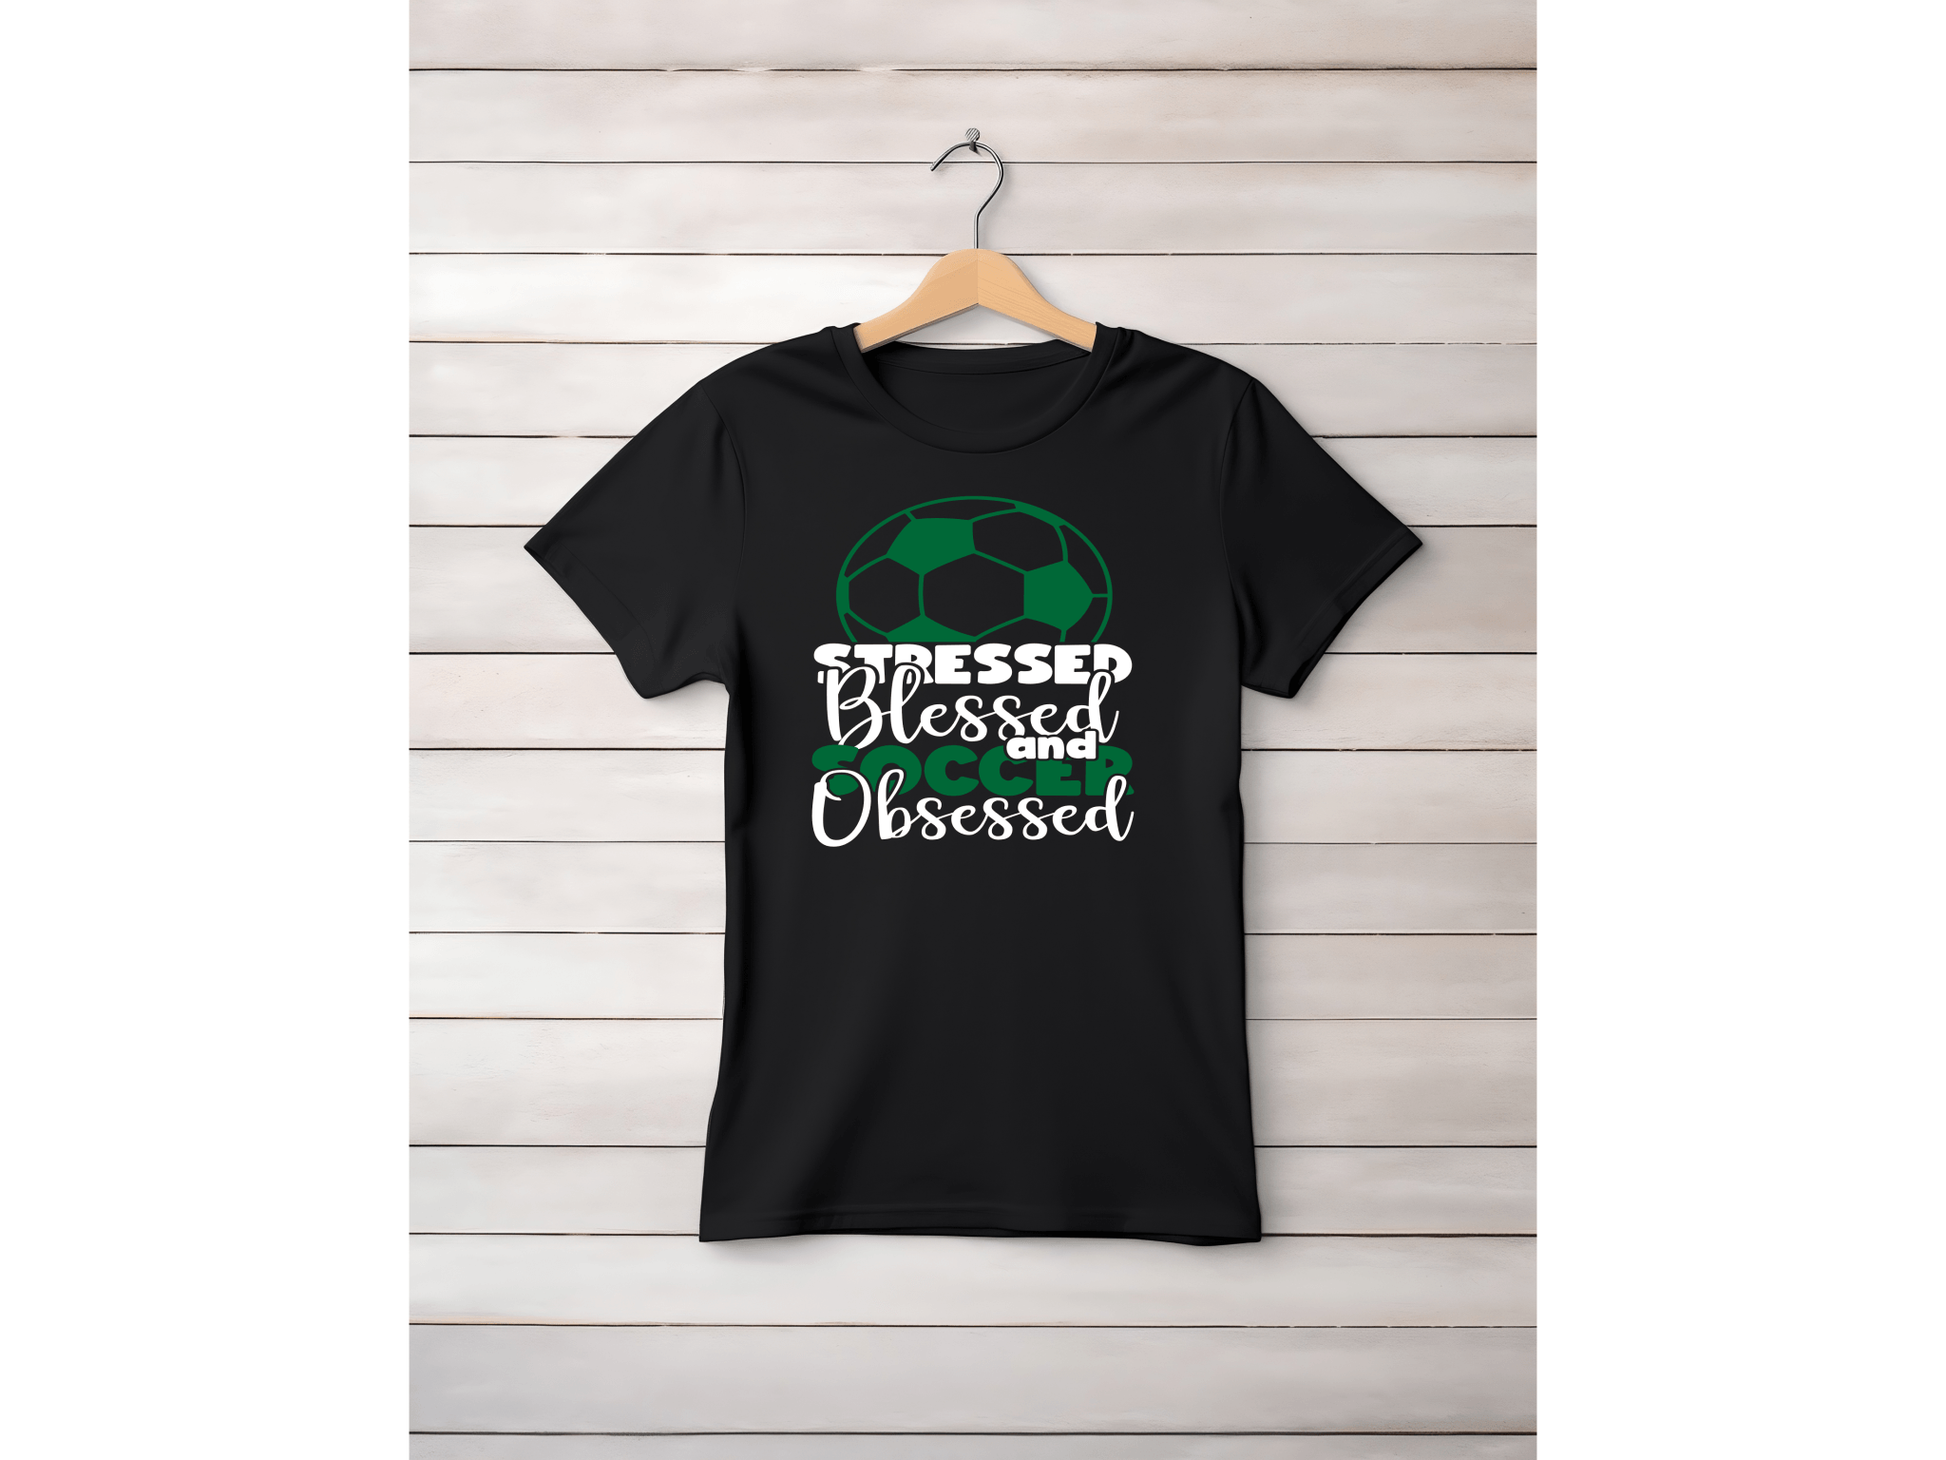 Stressed, Blessed and Soccer Obsessed Top - smuniqueshirts